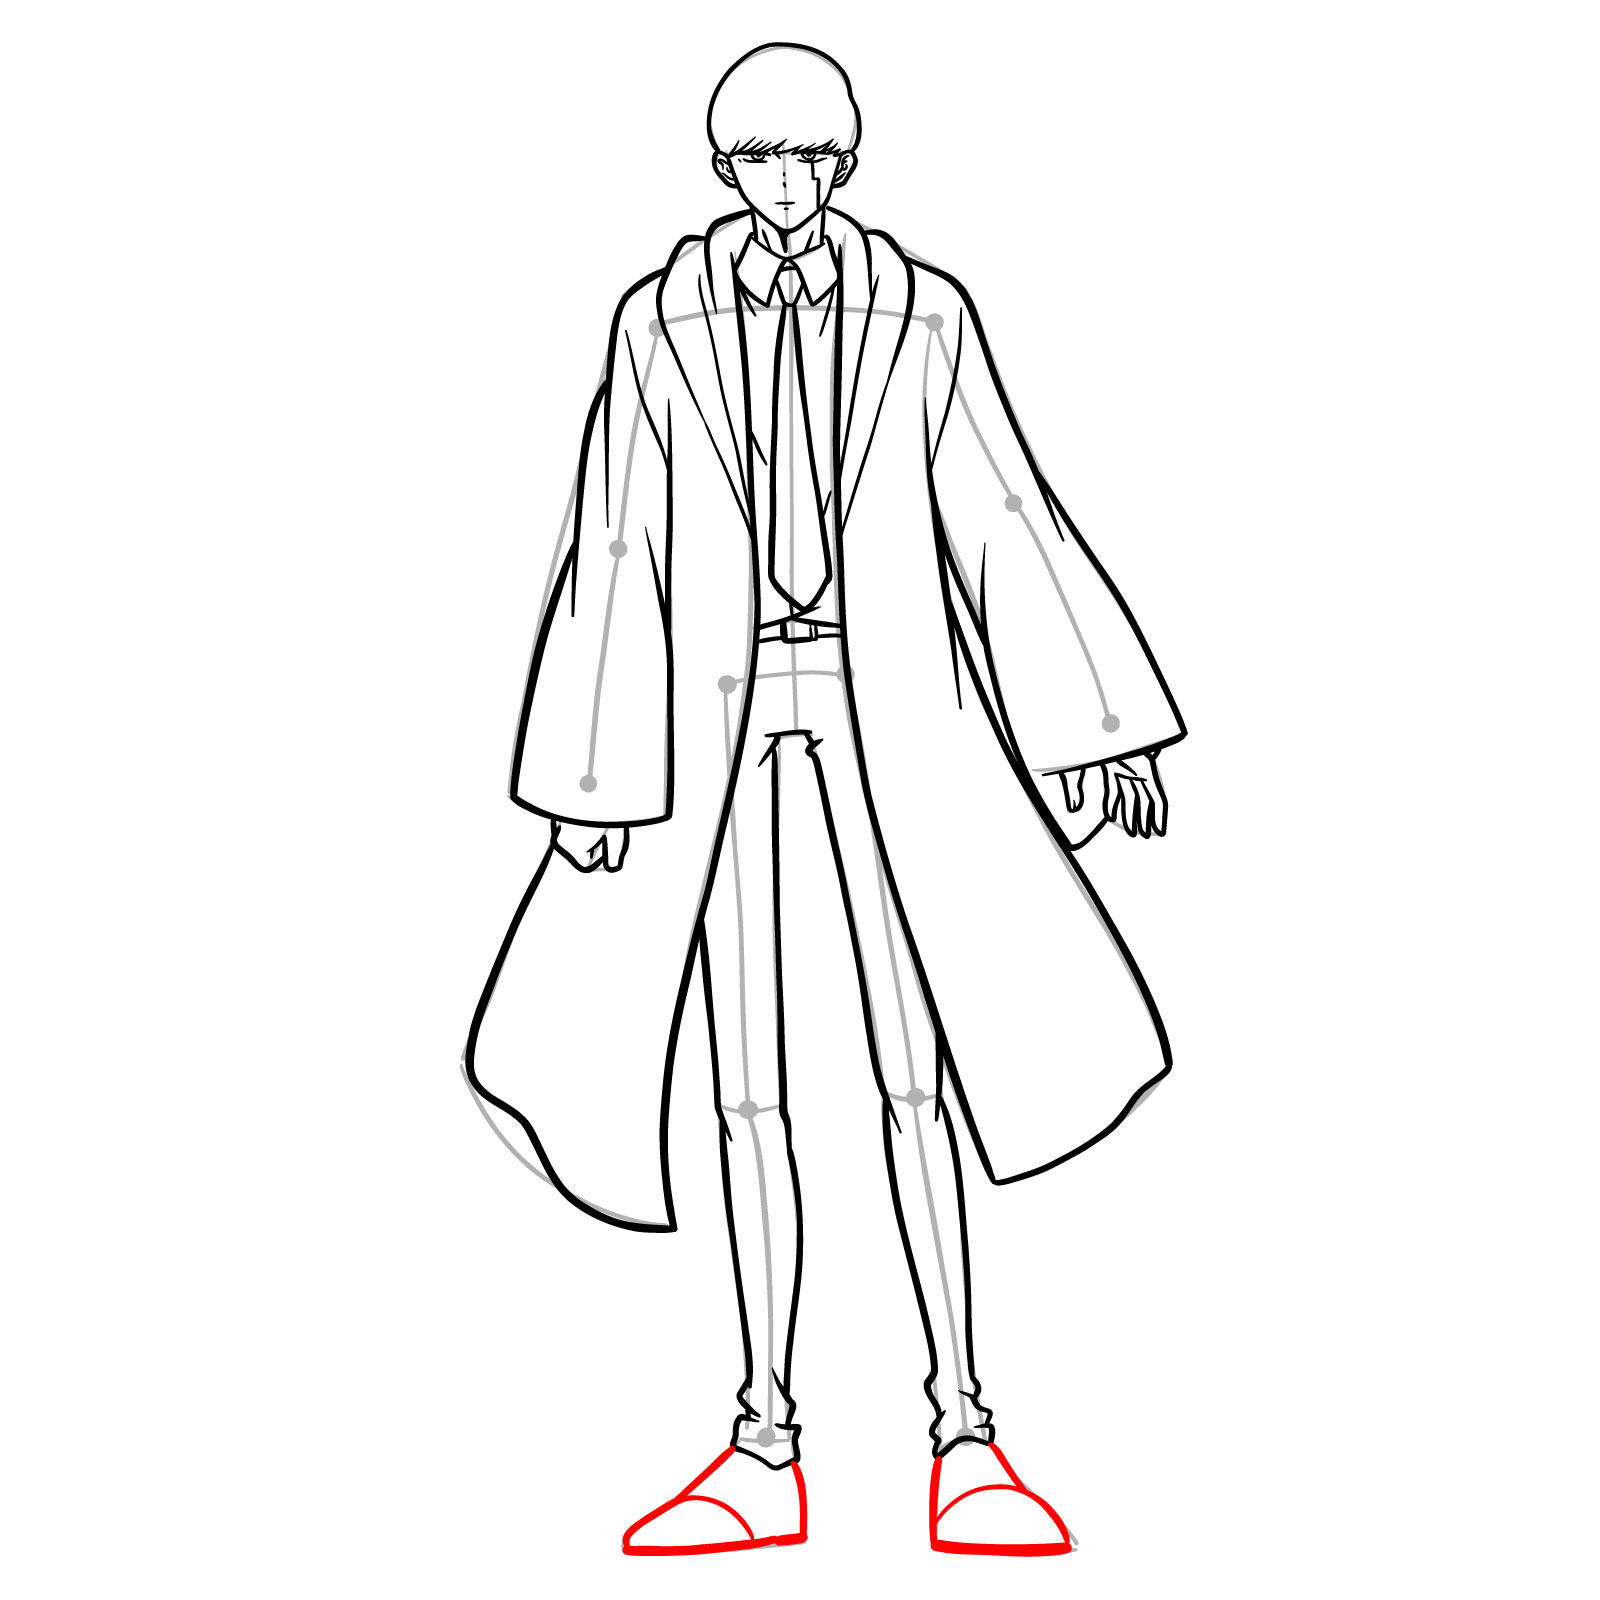 Sketching the shoes of Mash - step 17